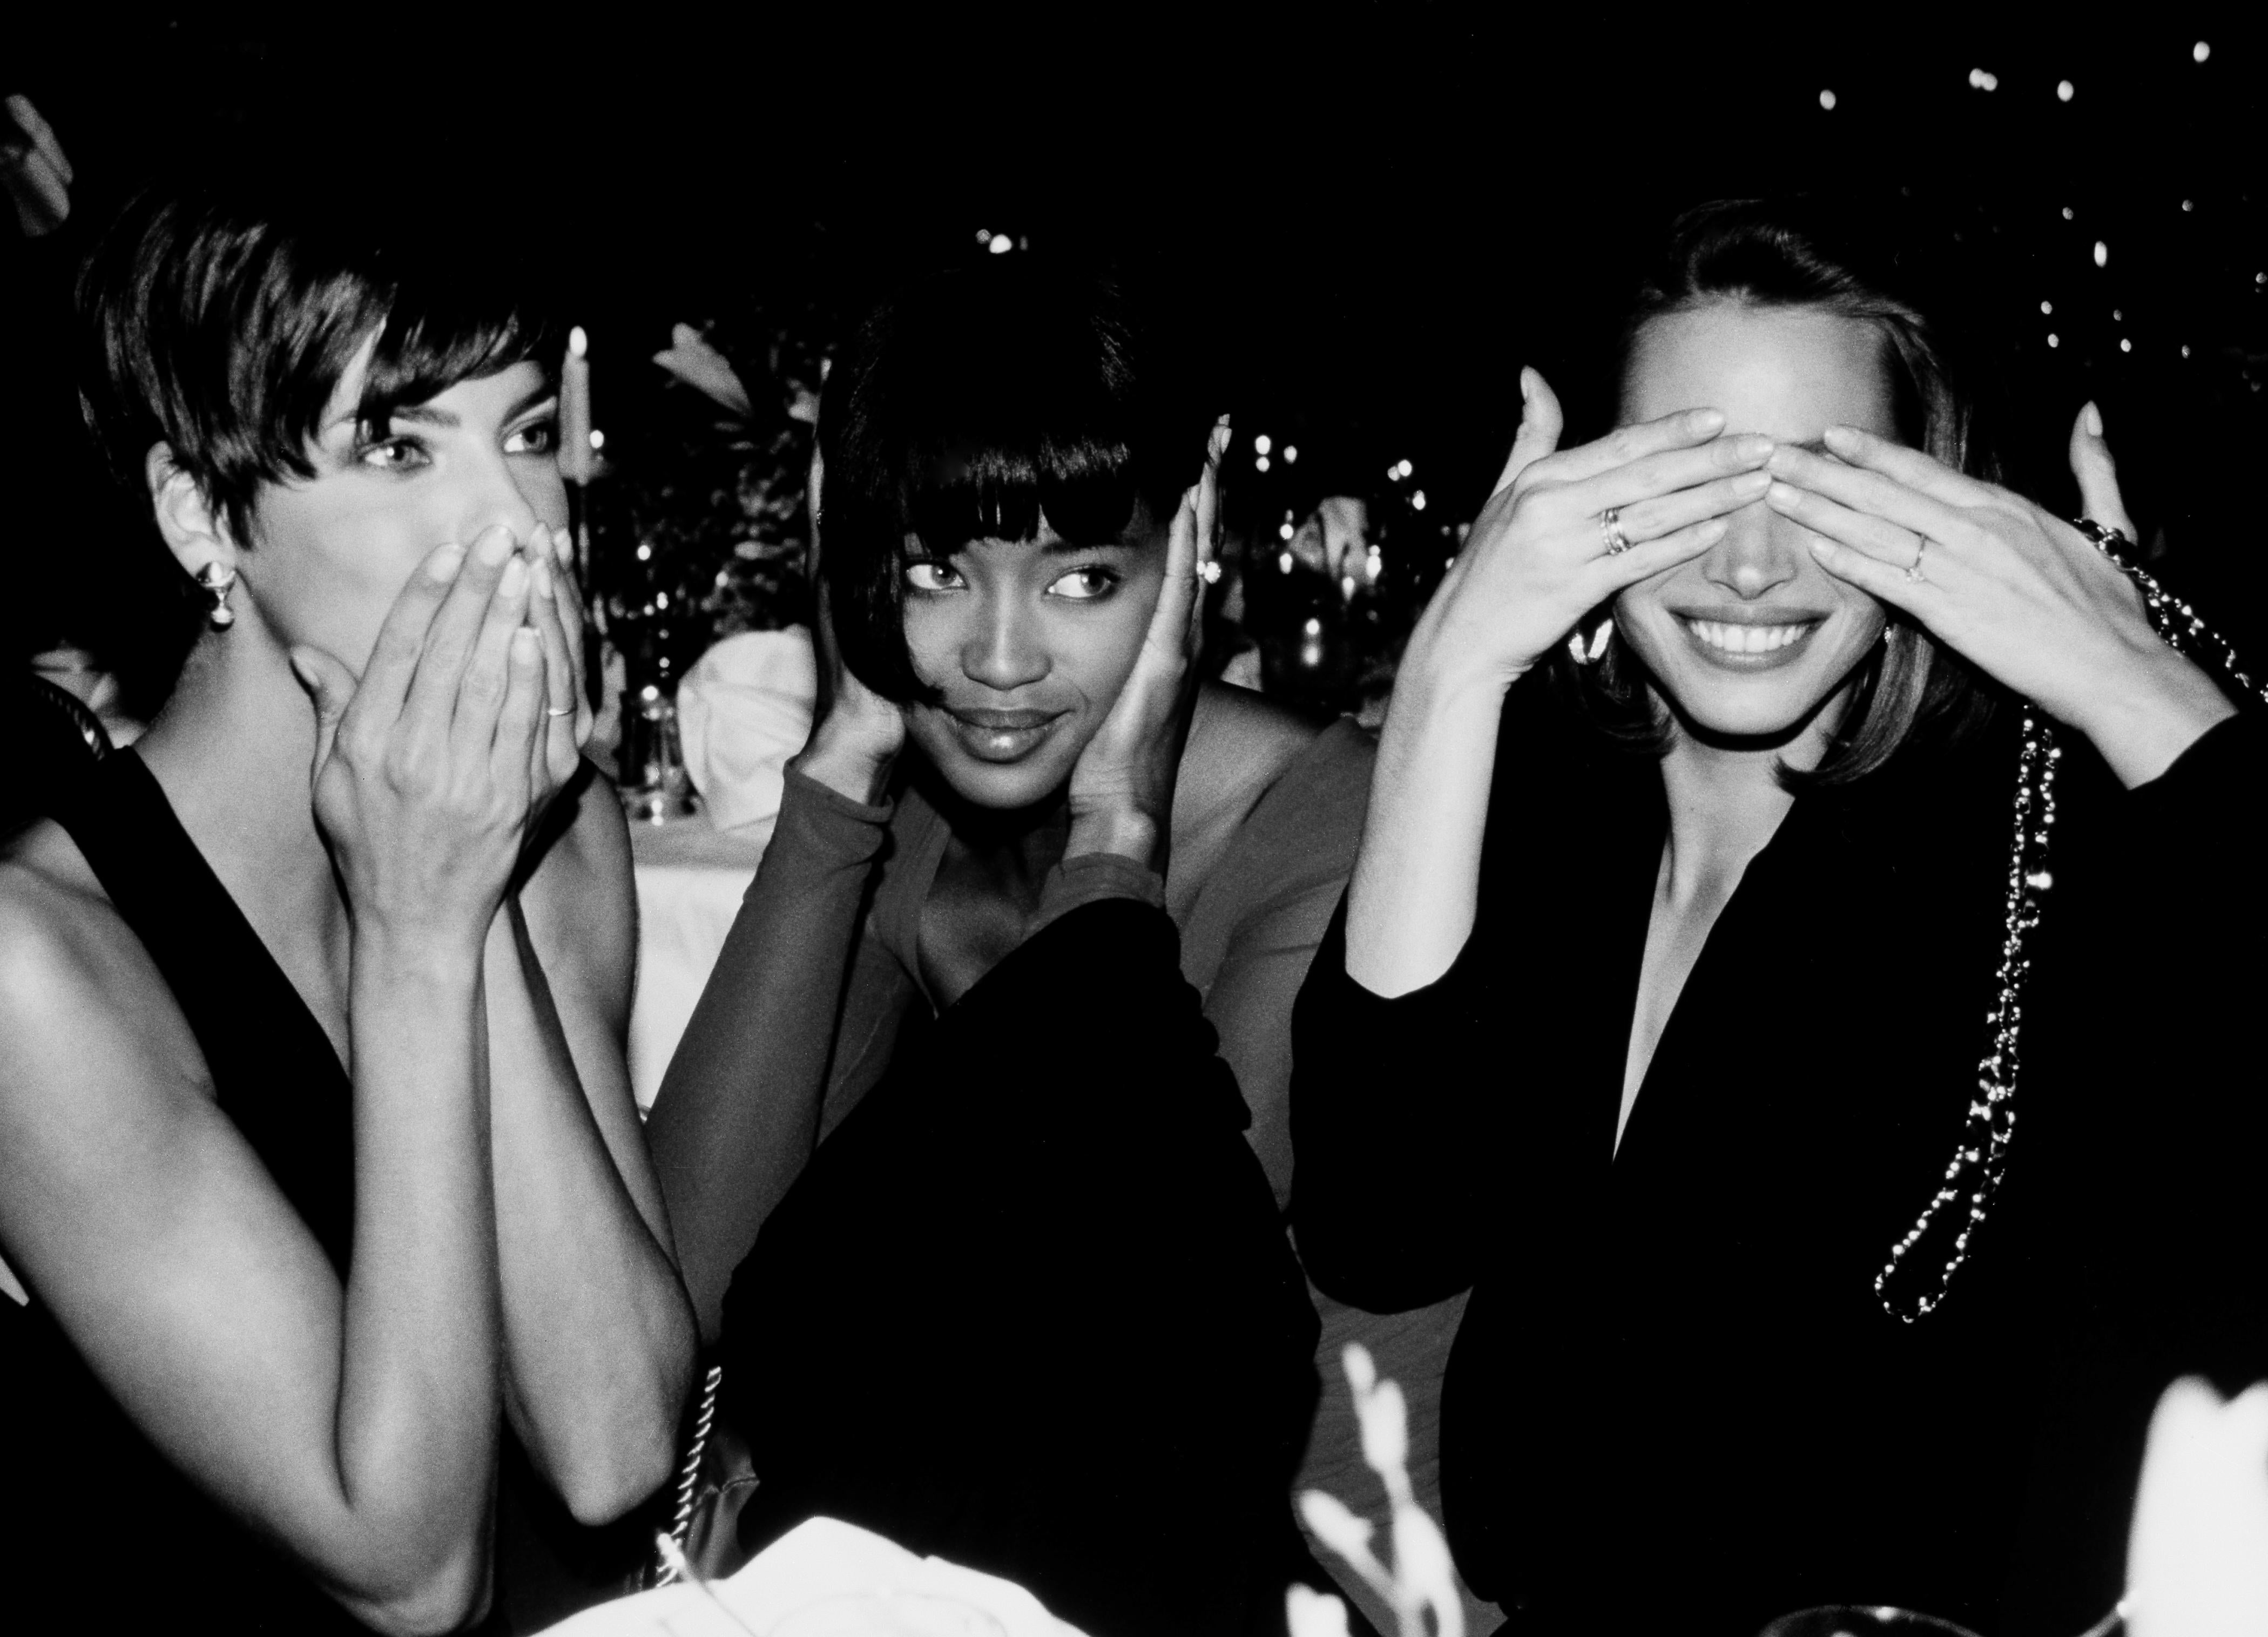 Seeing, Speaking, Hearing no Evil - three supermodels, fine art photography